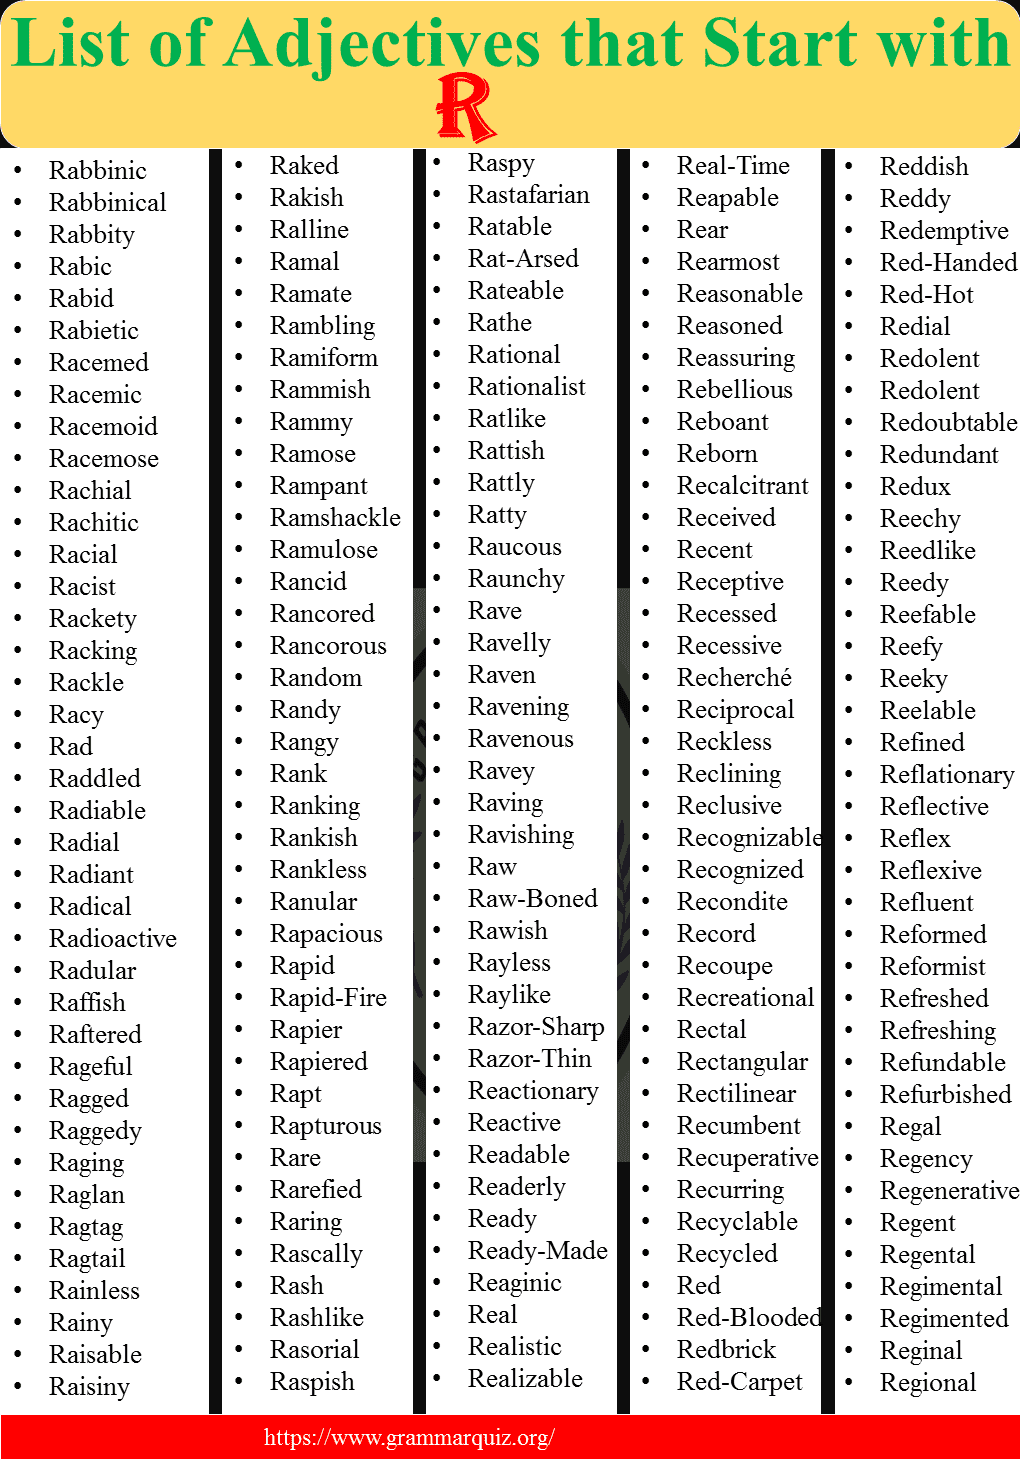 Adjectives that Start with R-1